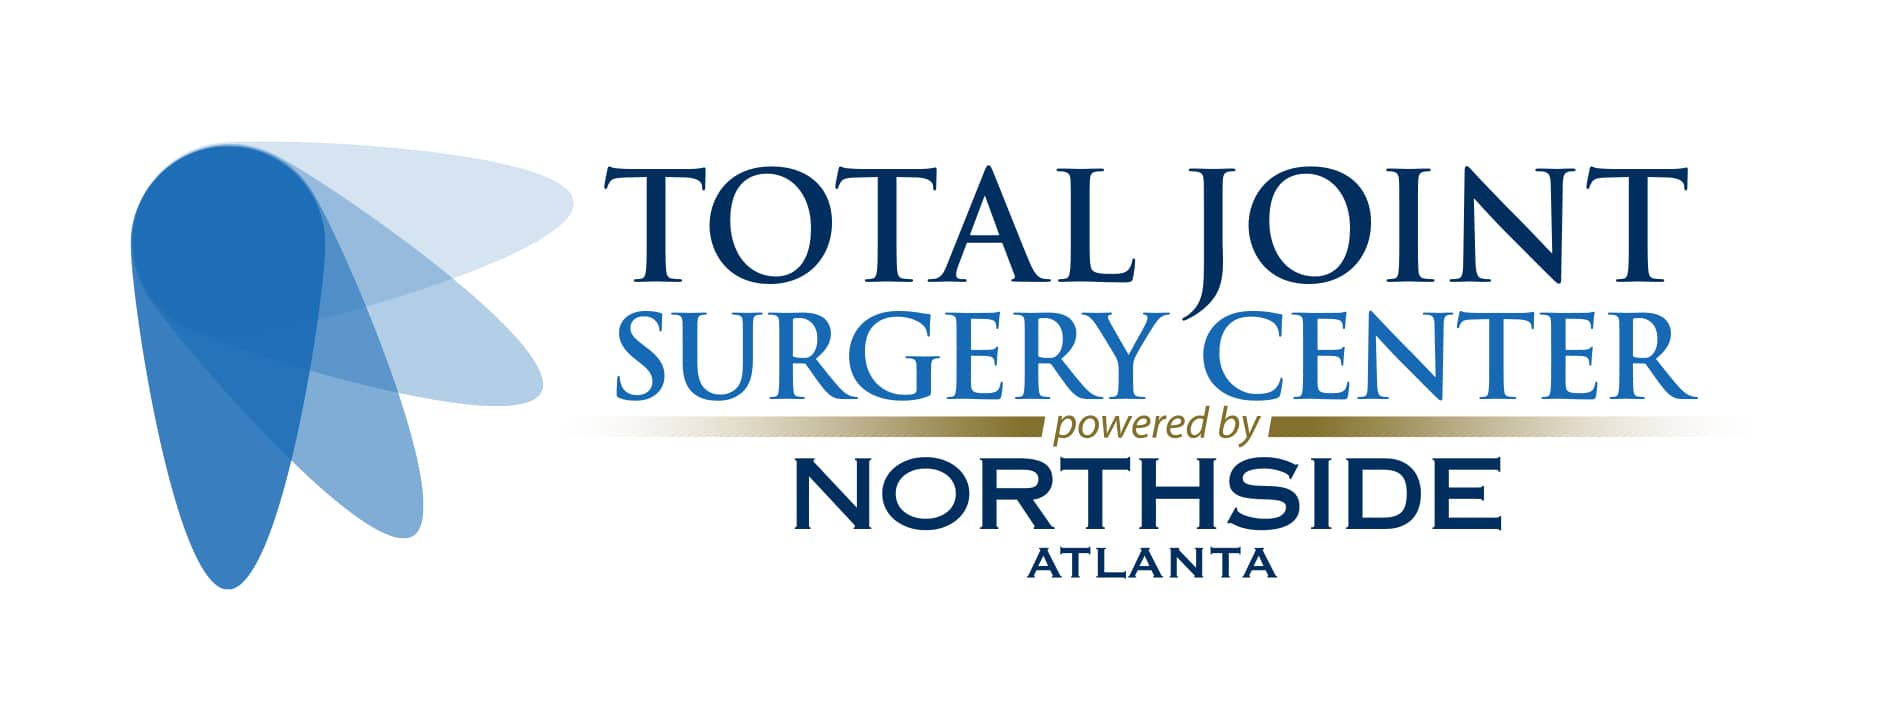 Total Joint Surgery Center